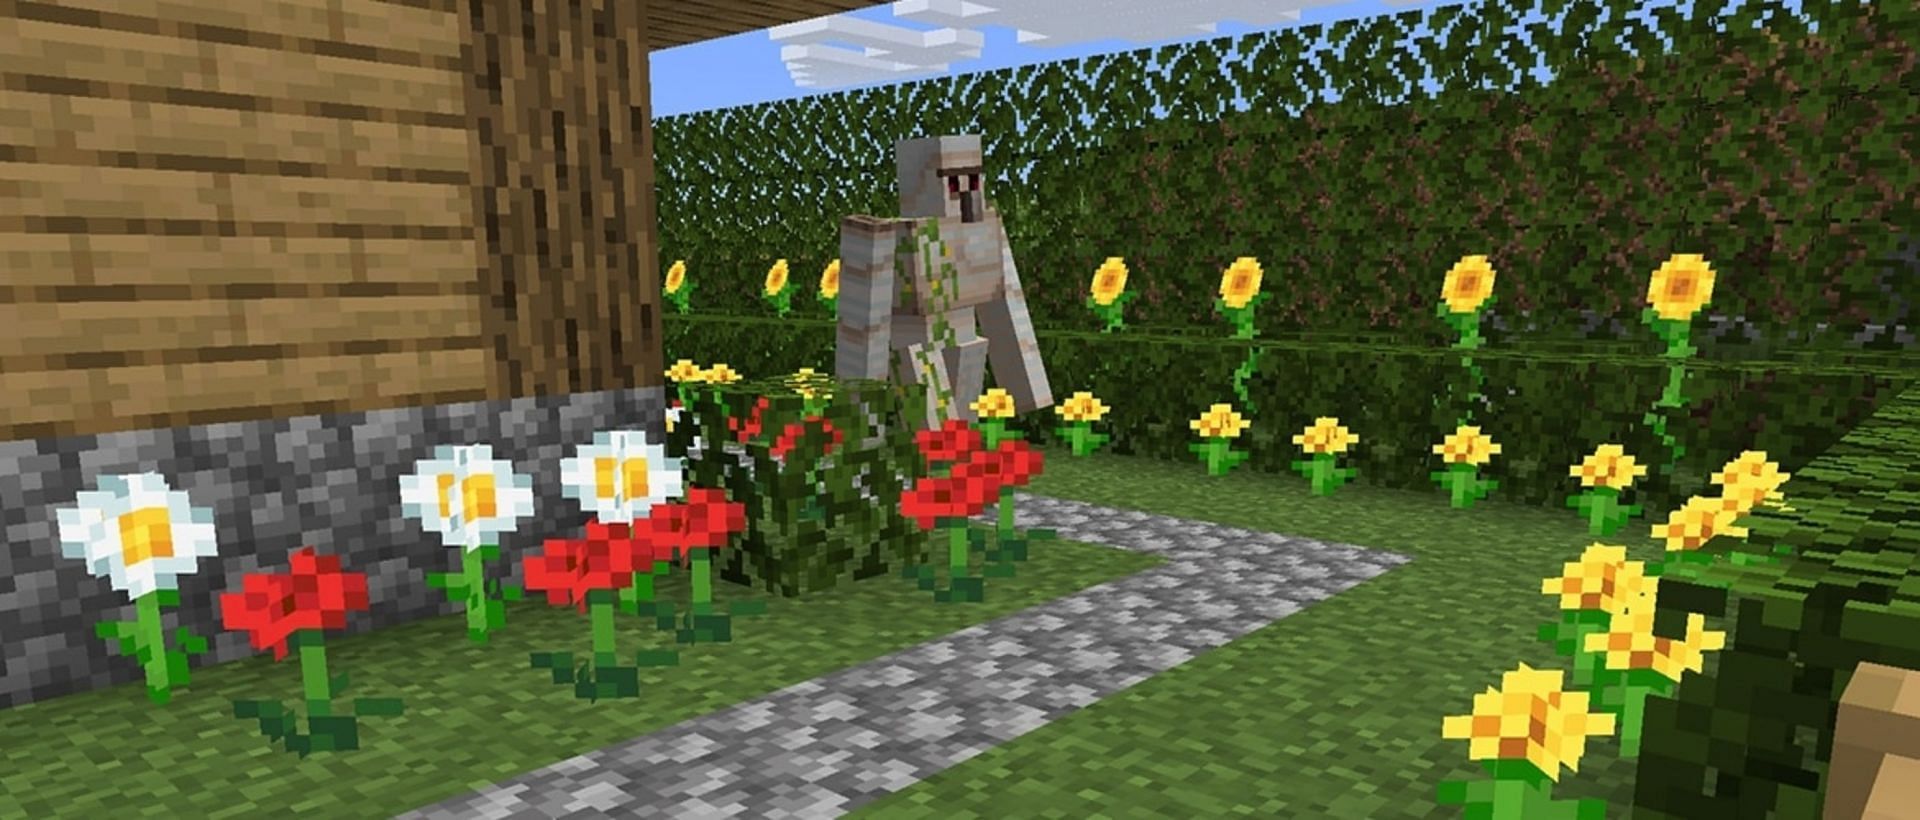 Iron golems are fond of giving flowers to villagers (Image via Mojang)